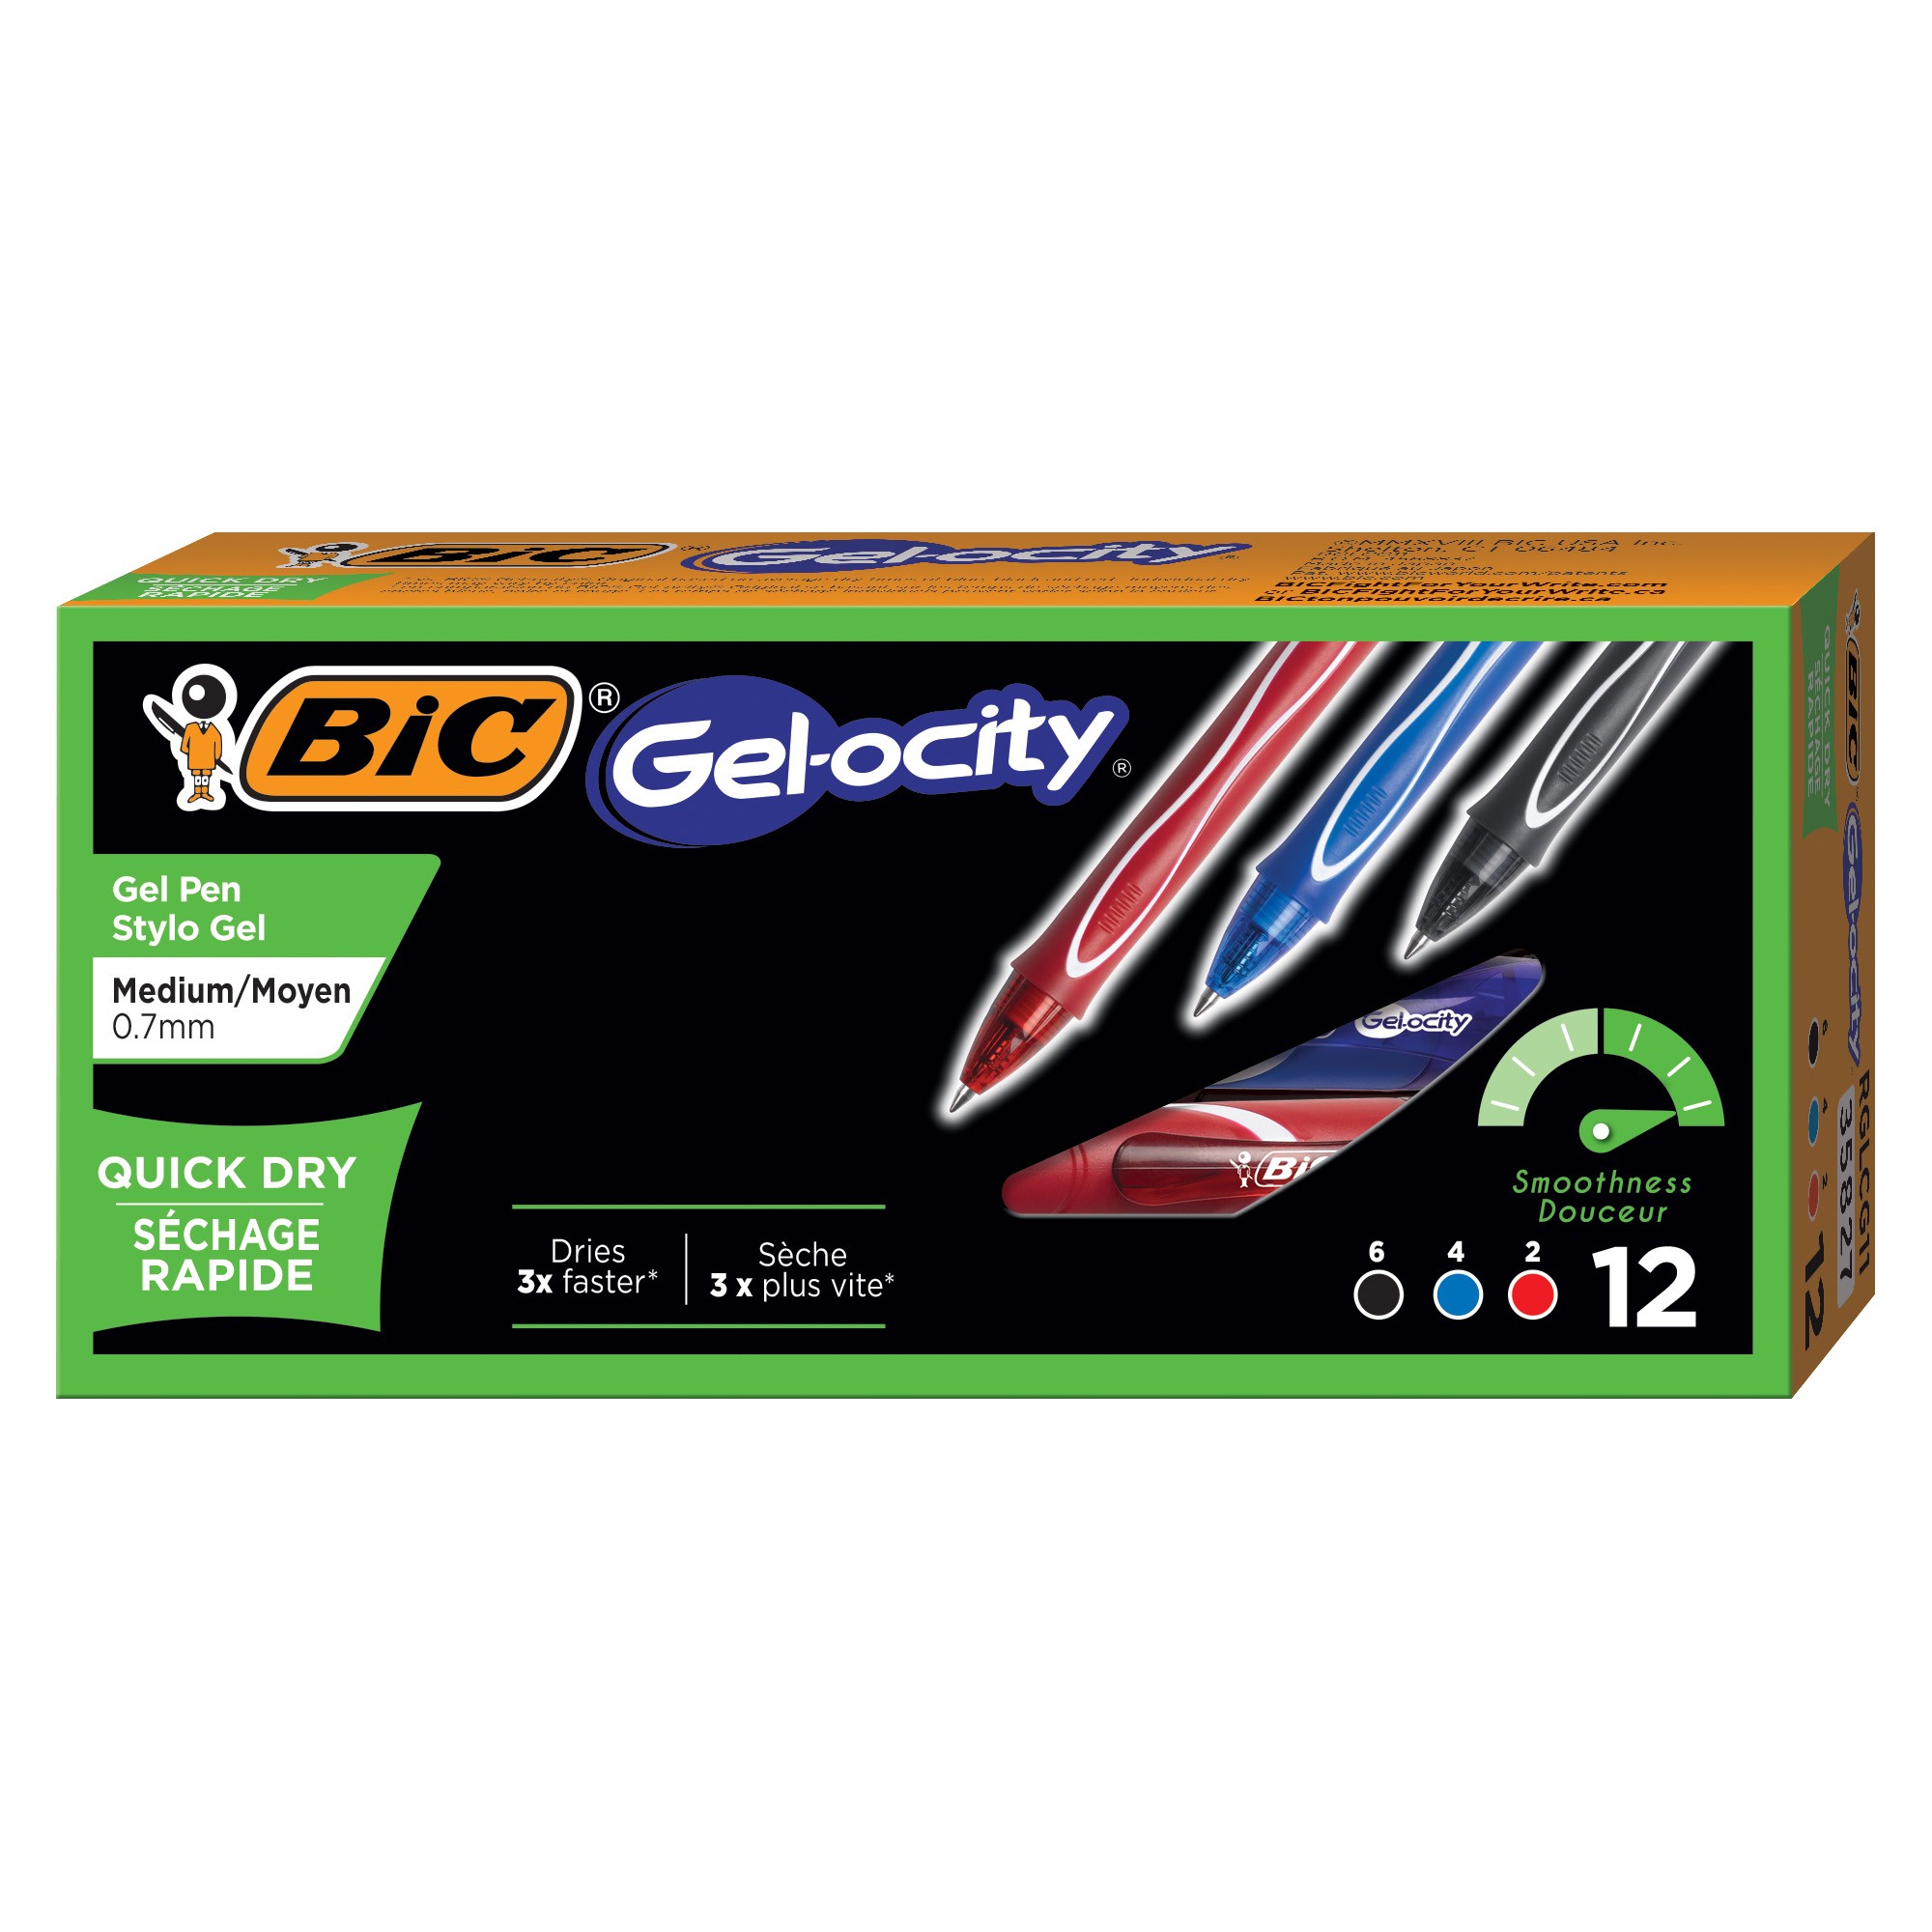 Gel-ocity Quick Dry Retractable Gel Pens, Assorted Black, Blue and Red, Pack of 12